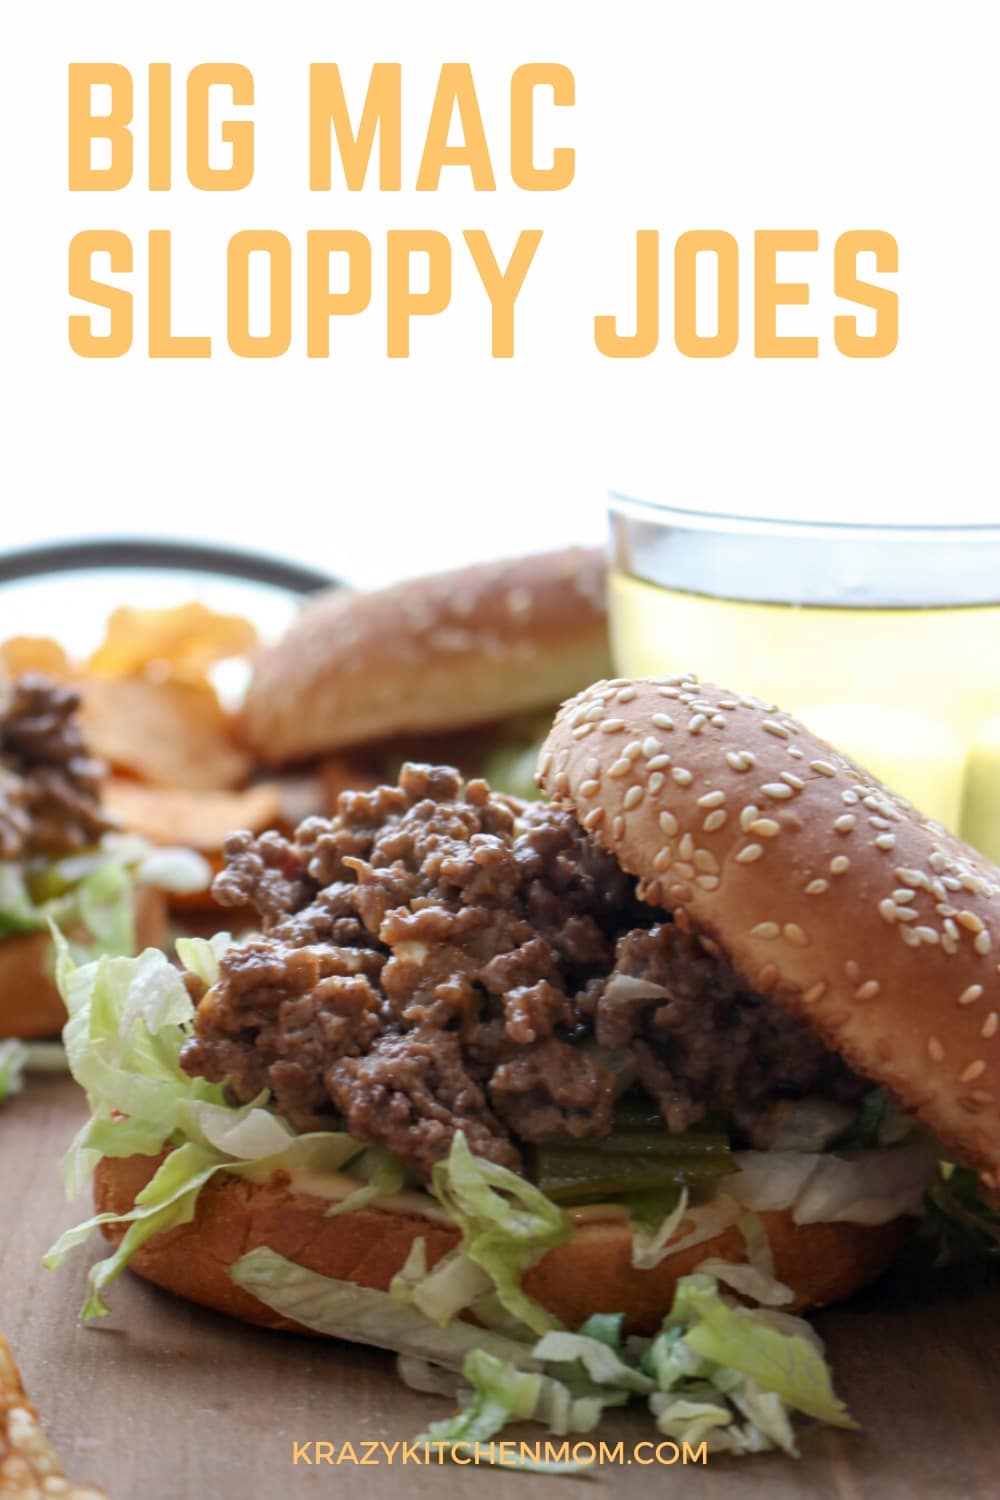 Roll up your sleeves because you are going to want to dig into these Big Mac Sloppy Joes with both hands. The recipe comes together in under 15 minutes and it tastes EXACTLY like a Big Mac! via @krazykitchenmom